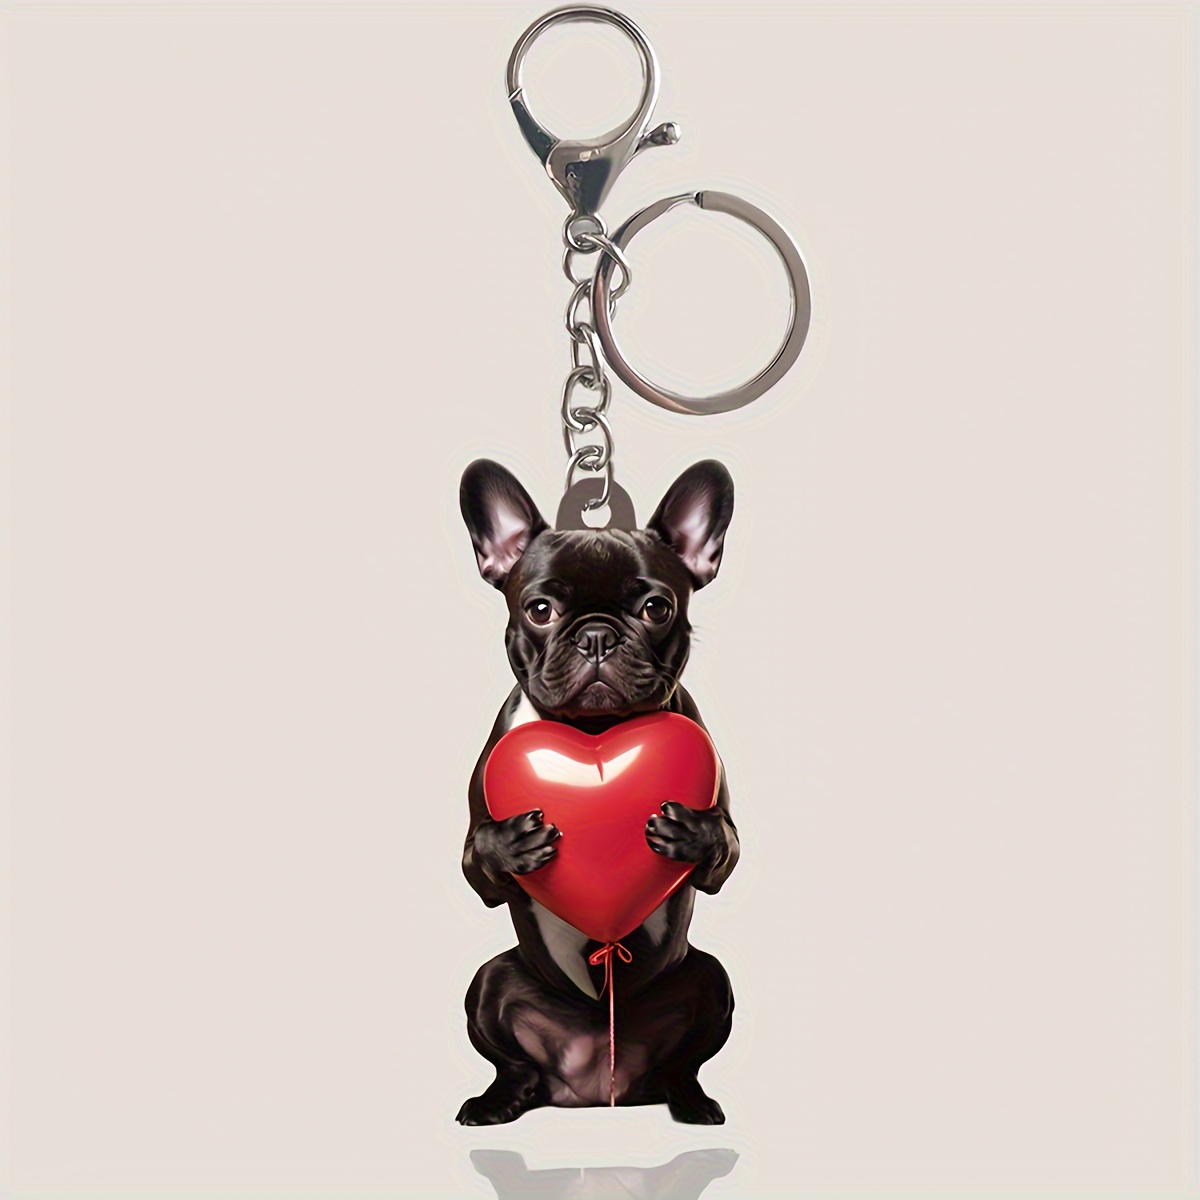 

2d Heart-shaped Balloon Dog Keychains, Acrylic Keychain Bag Backpack Hanging Pendant Men's And Women's Wallet Car Key Charm